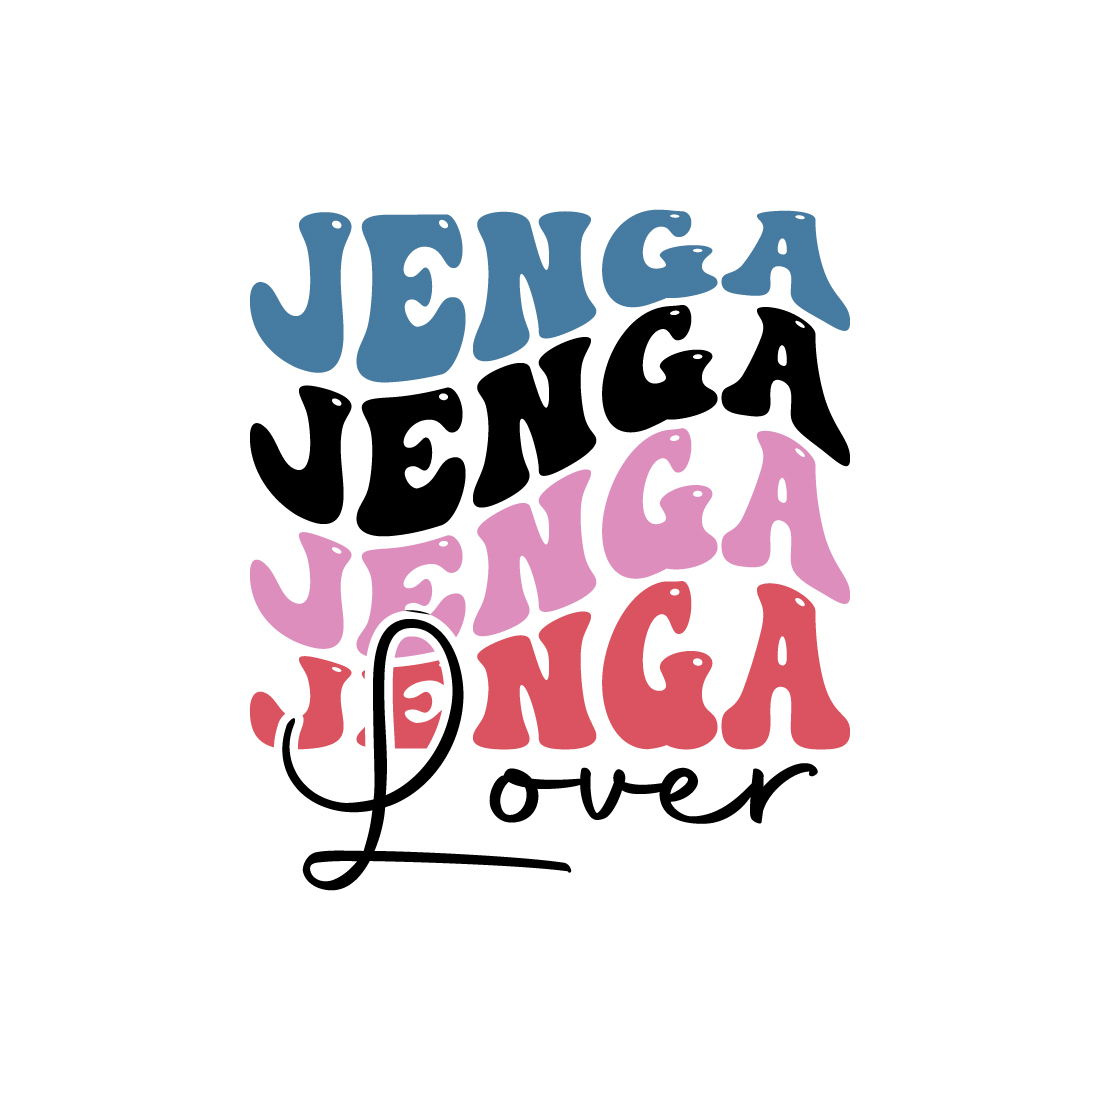 Jenga lover indoor game typography design for t-shirts, cards, frame artwork, phone cases, bags, mugs, stickers, tumblers, print, etc preview image.